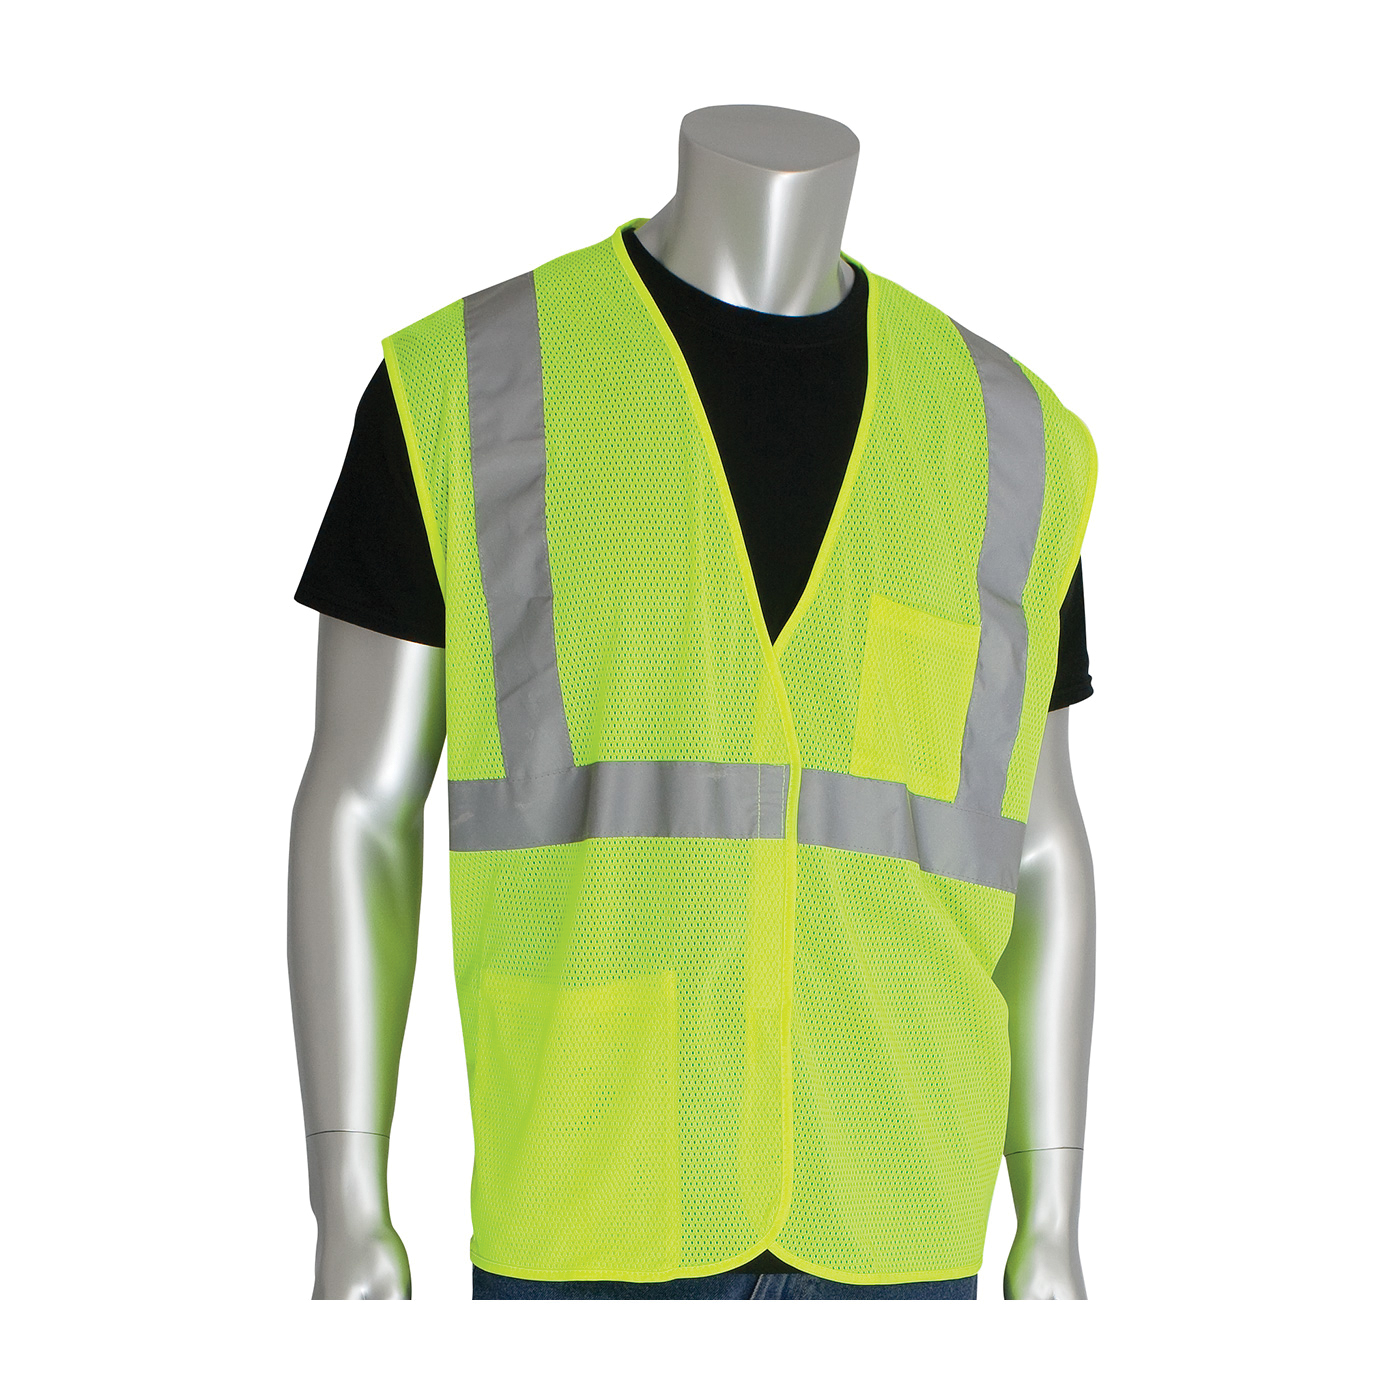 PIP® 302-0702-LY/S Safety Vest, S, Hi-Viz Lime Yellow, Polyester Mesh, Hook and Loop Closure, 2 Pockets, ANSI Class: Class 2, Specifications Met: ANSI 107 Type R